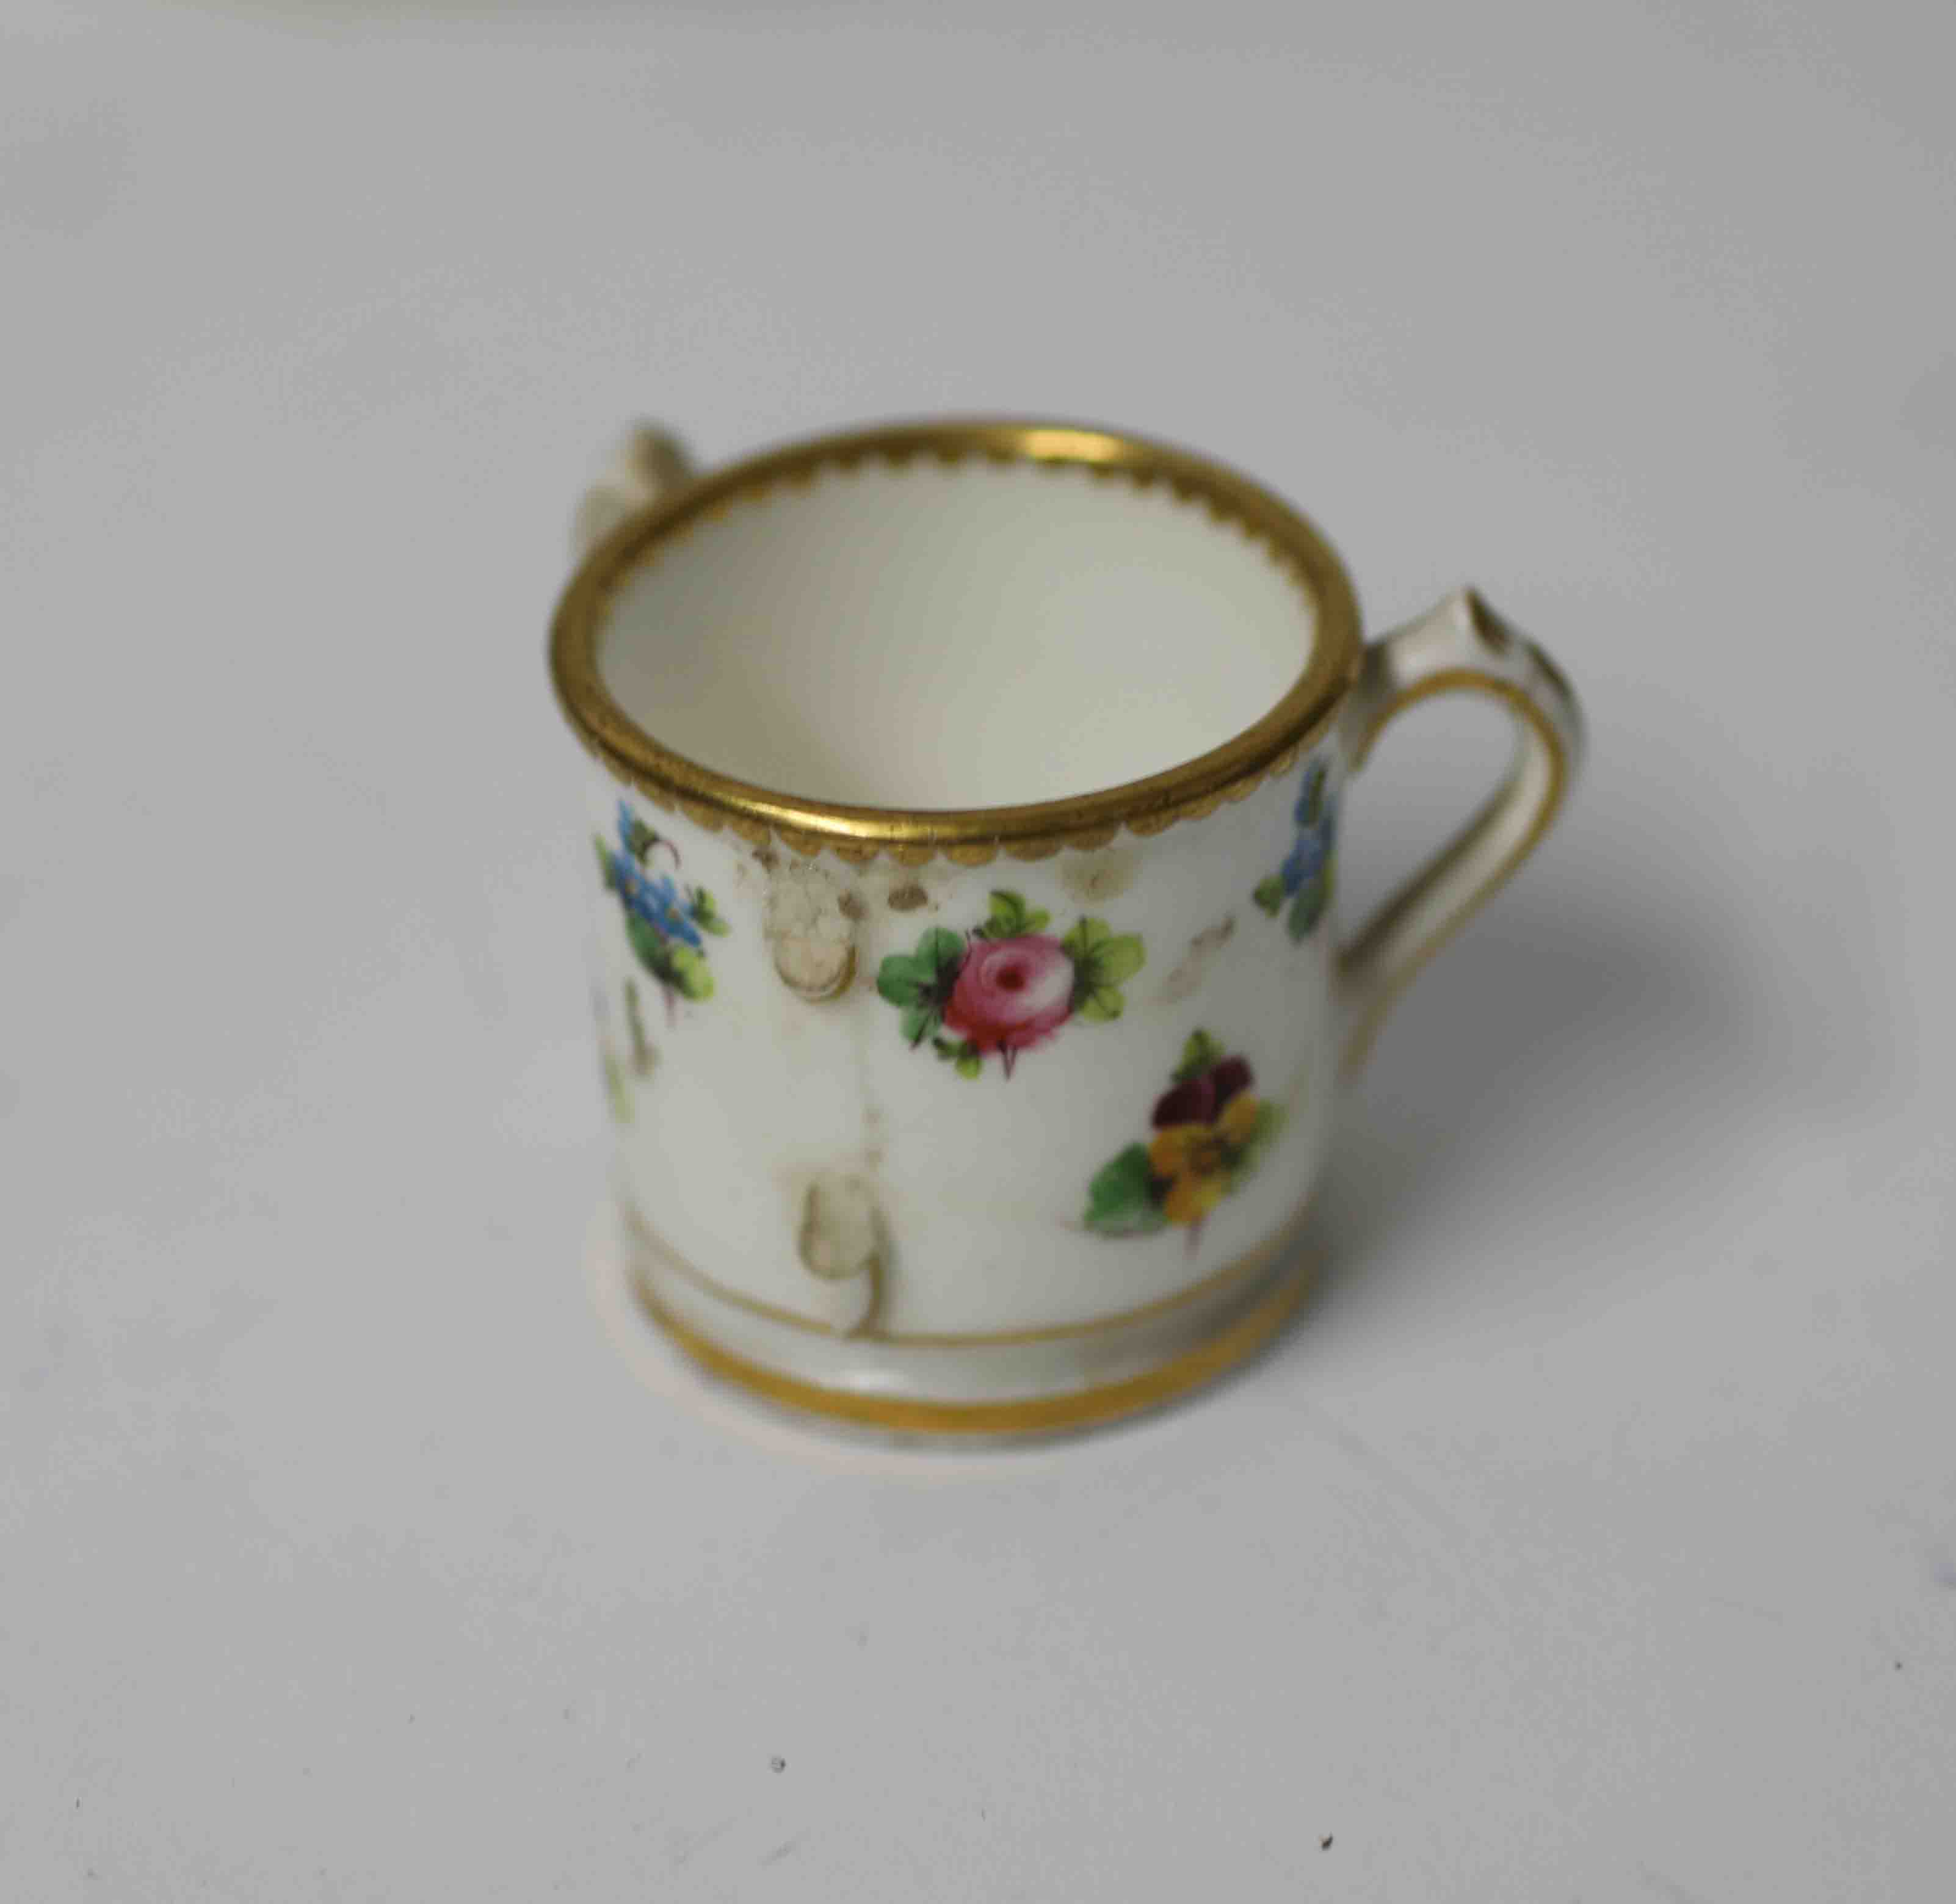 A Minton's part porcelain and floral decorated teapot & tea for one service, Staffordshire porcelain - Image 8 of 12